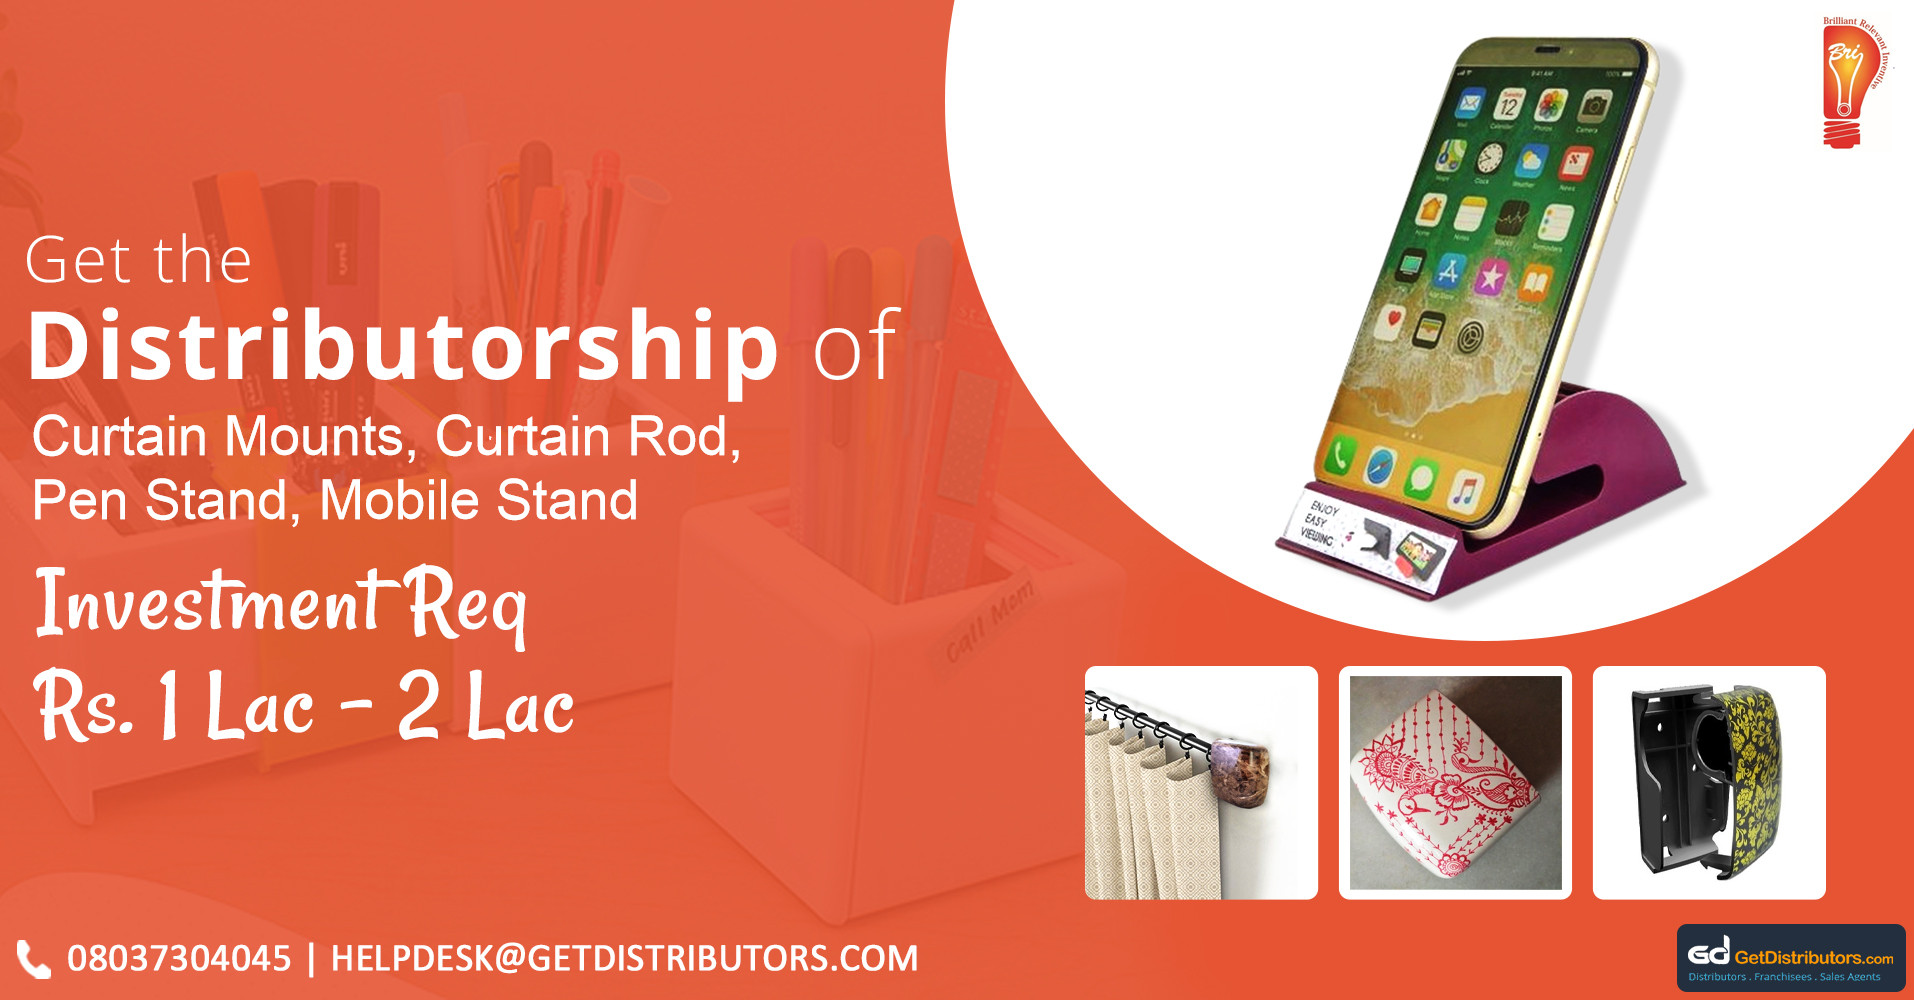 Distributorship of high-quality Curtain Mounts, Curtain Rods, Pen Stands, and Mobile Stands